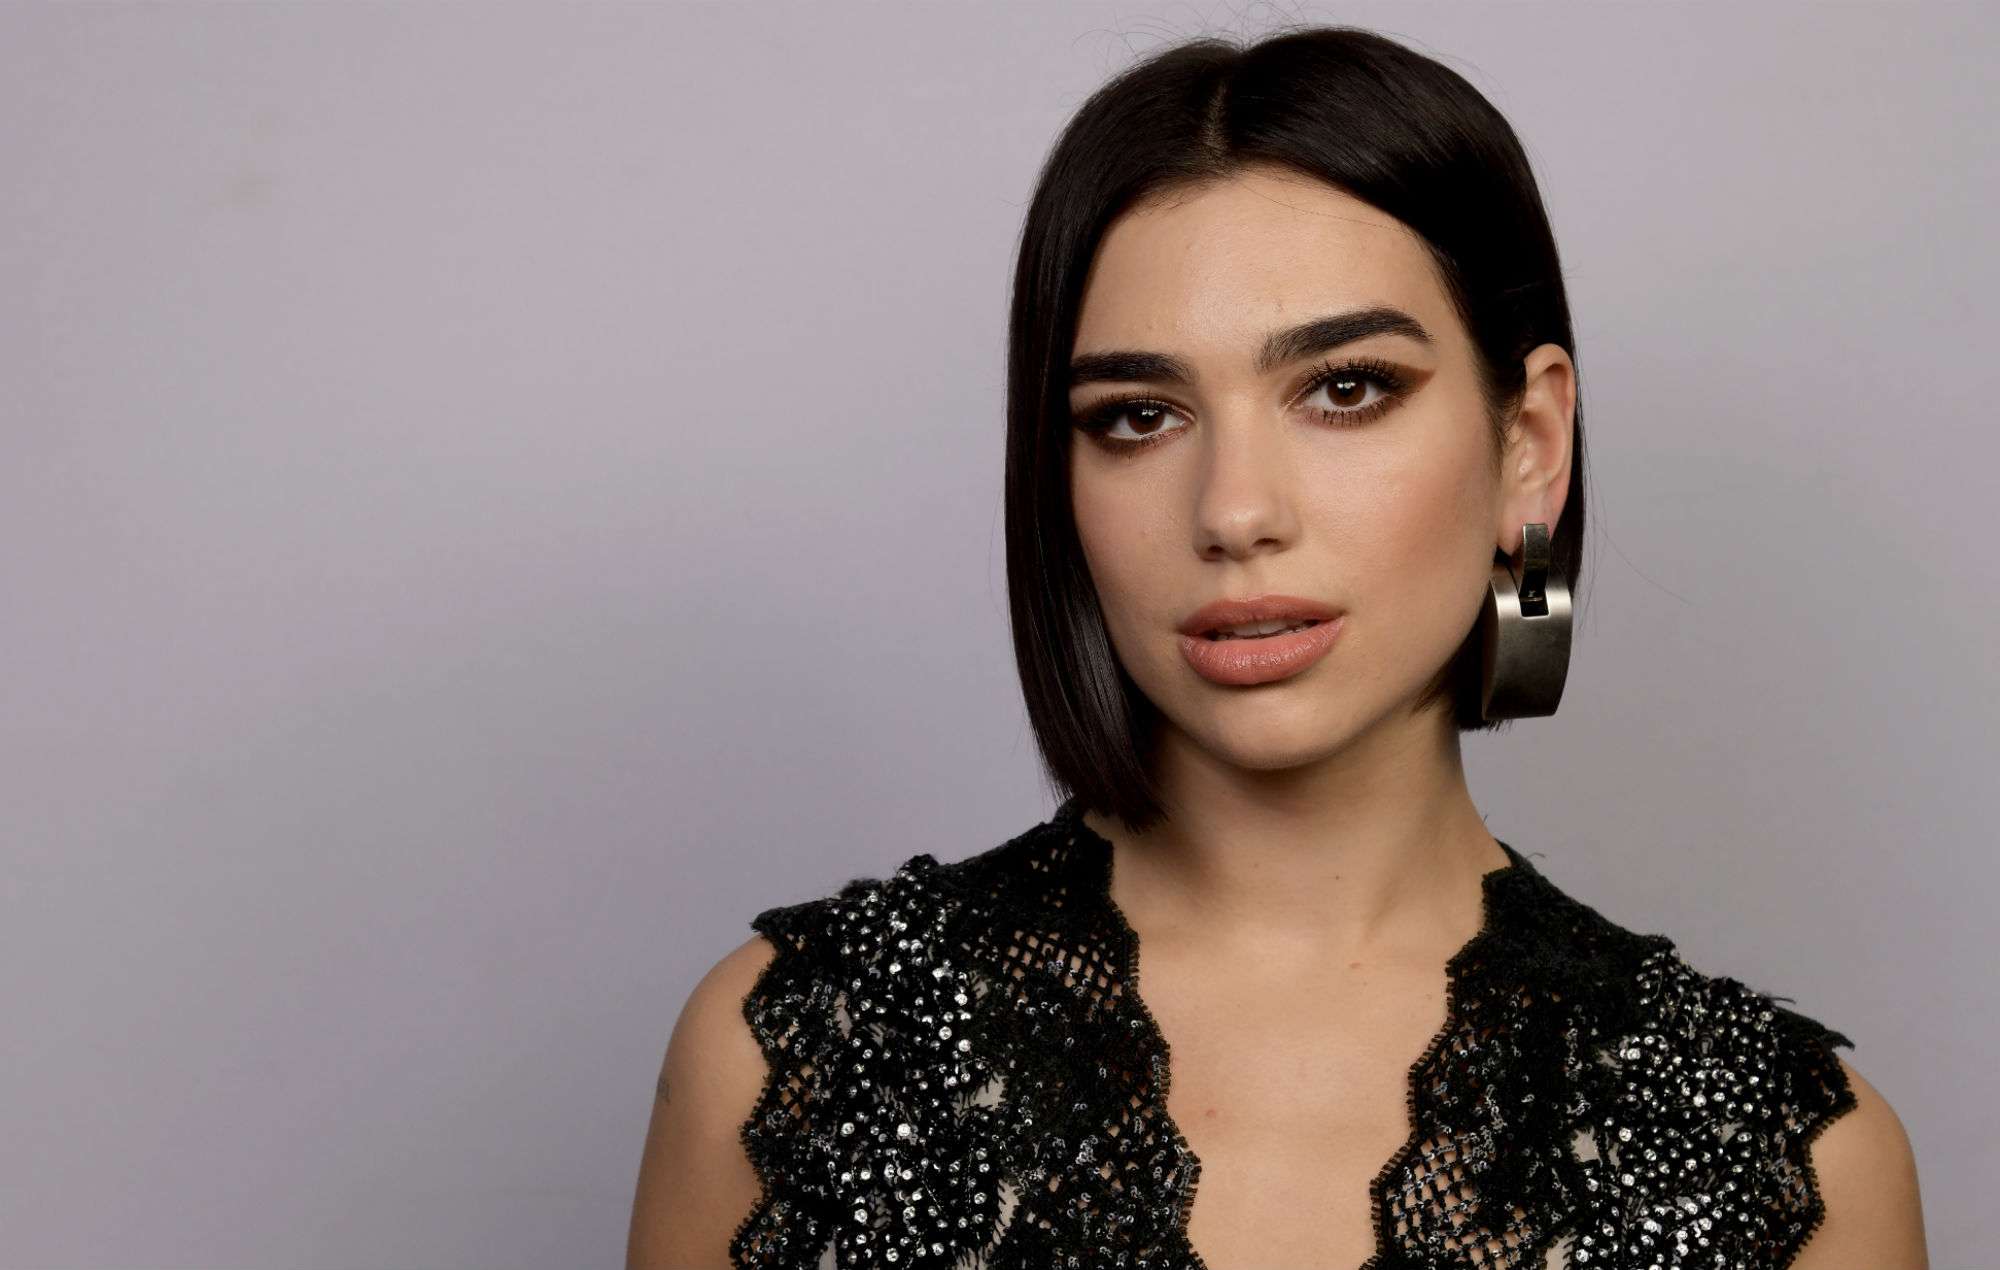 Dua Lipa criticizes Jewish group that condemned her stance on Palestinian